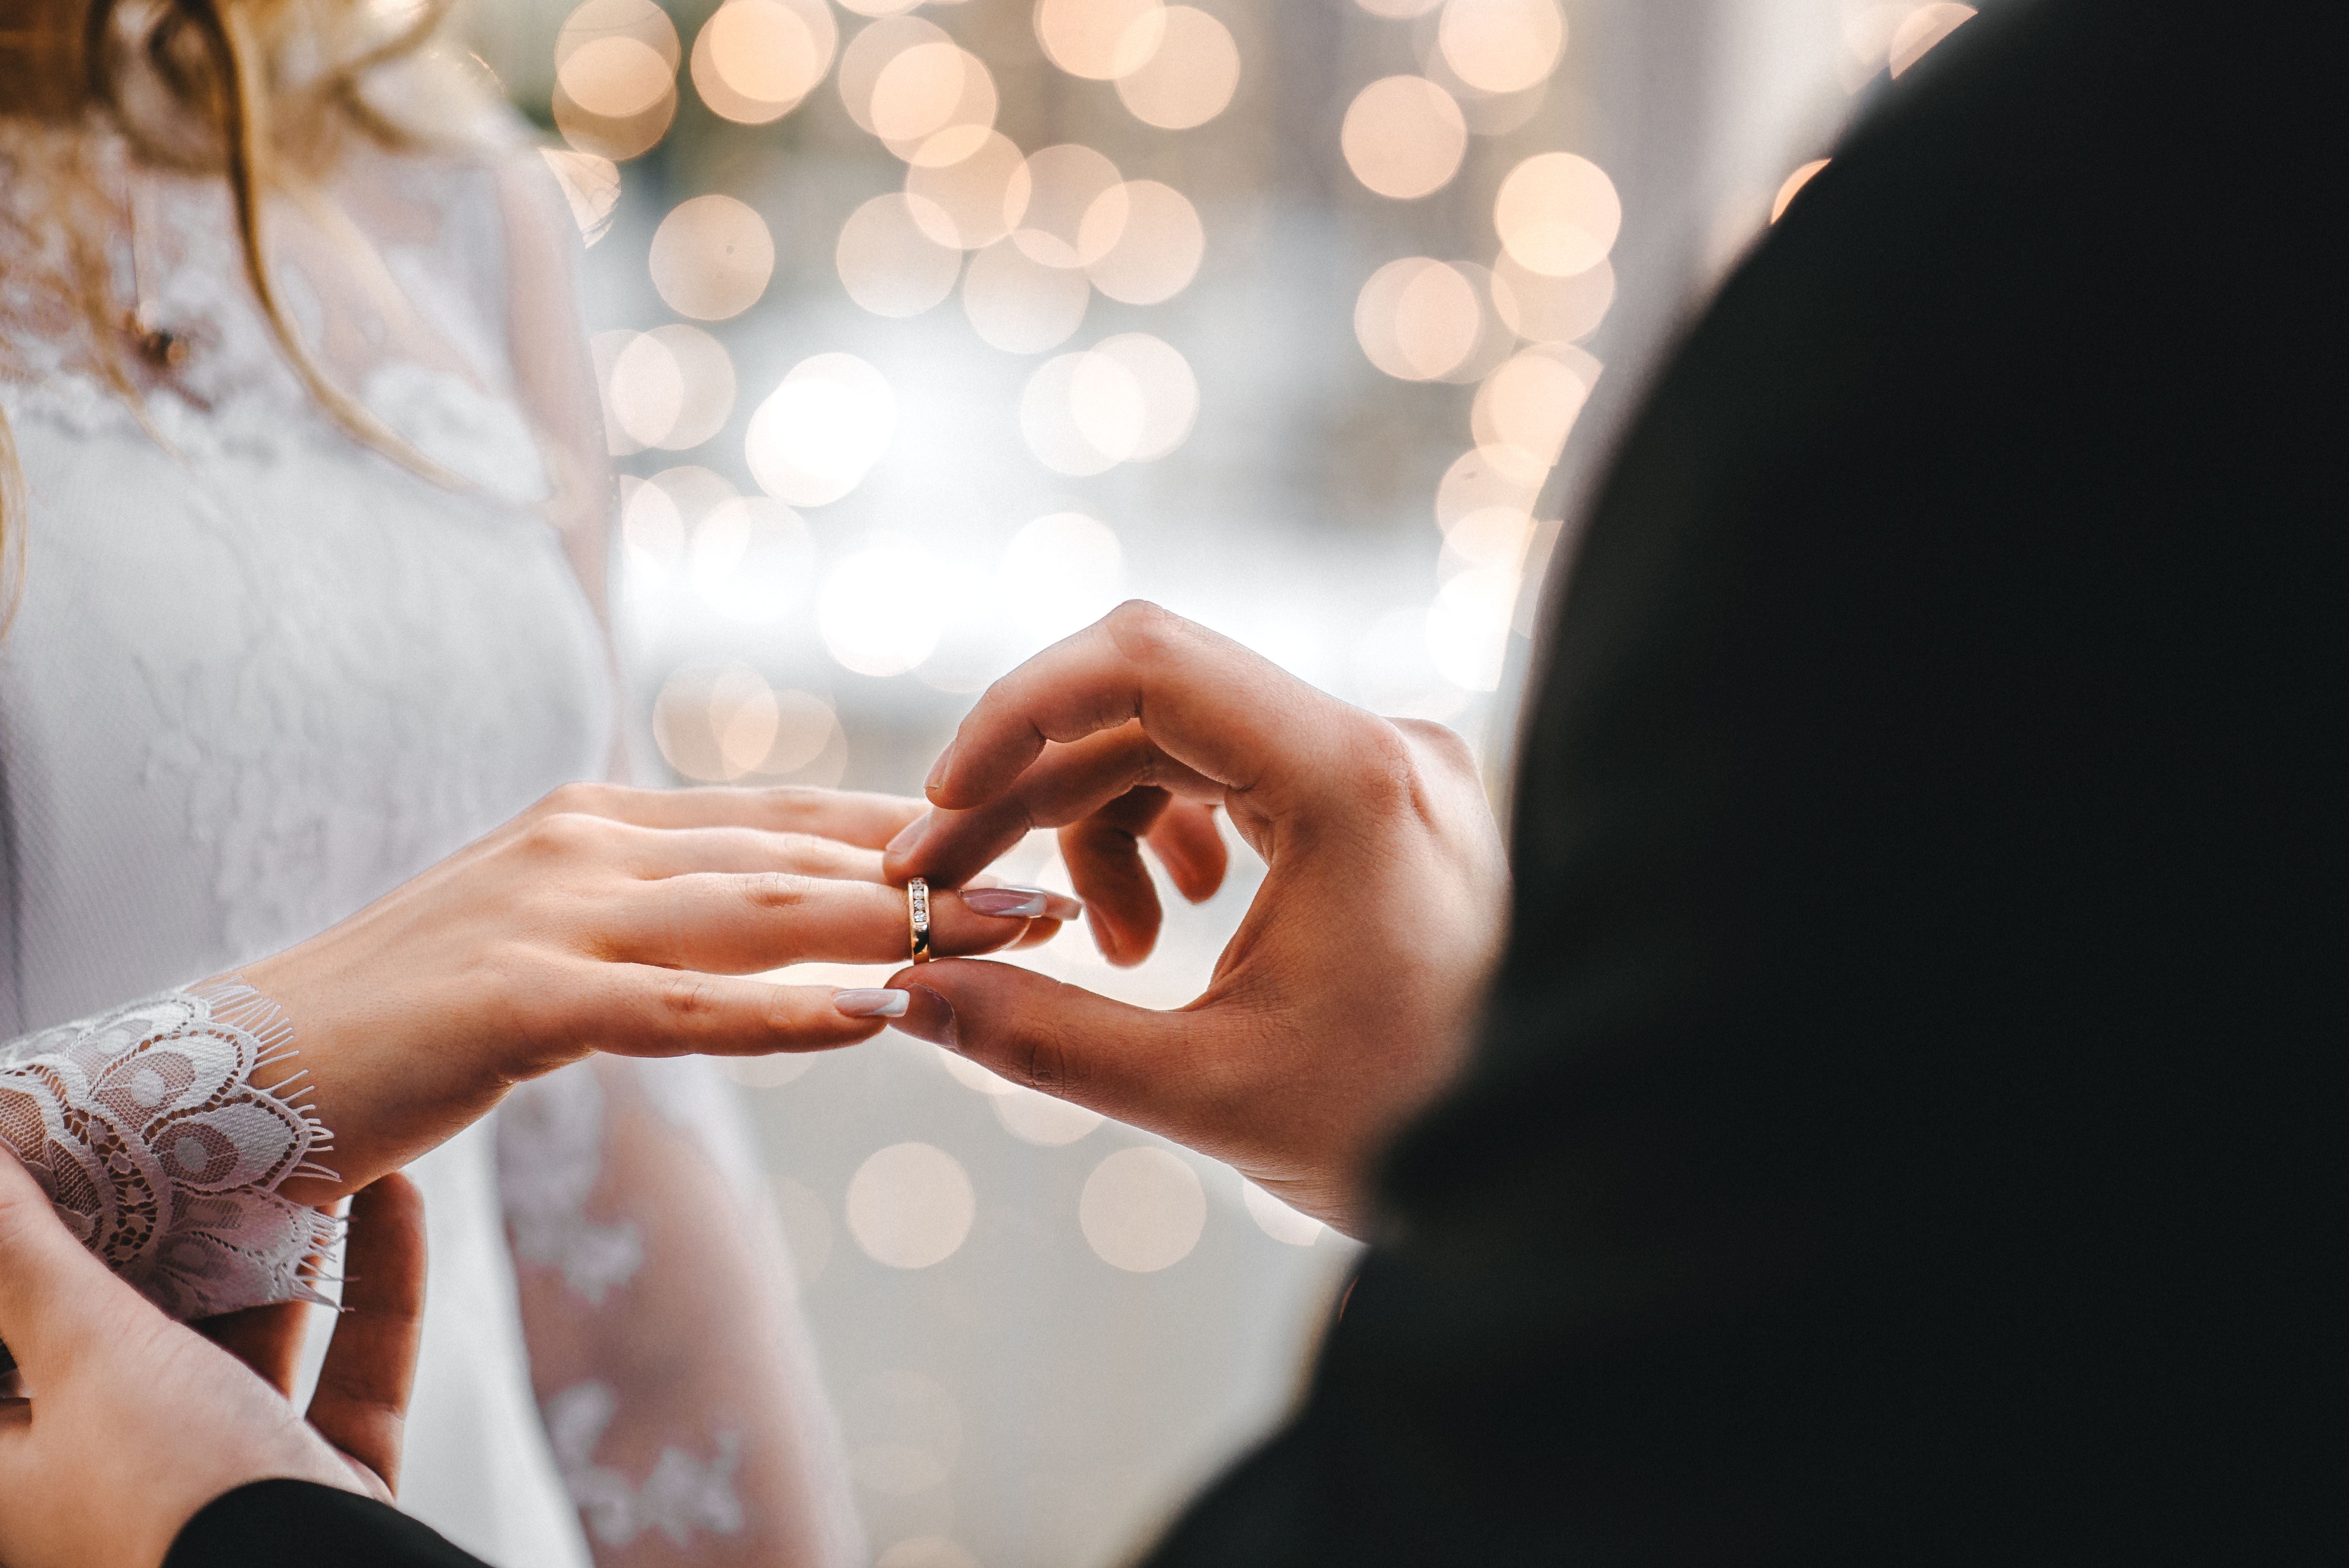 A groom places a wedding ring on his bride. | Source: Shutterstock